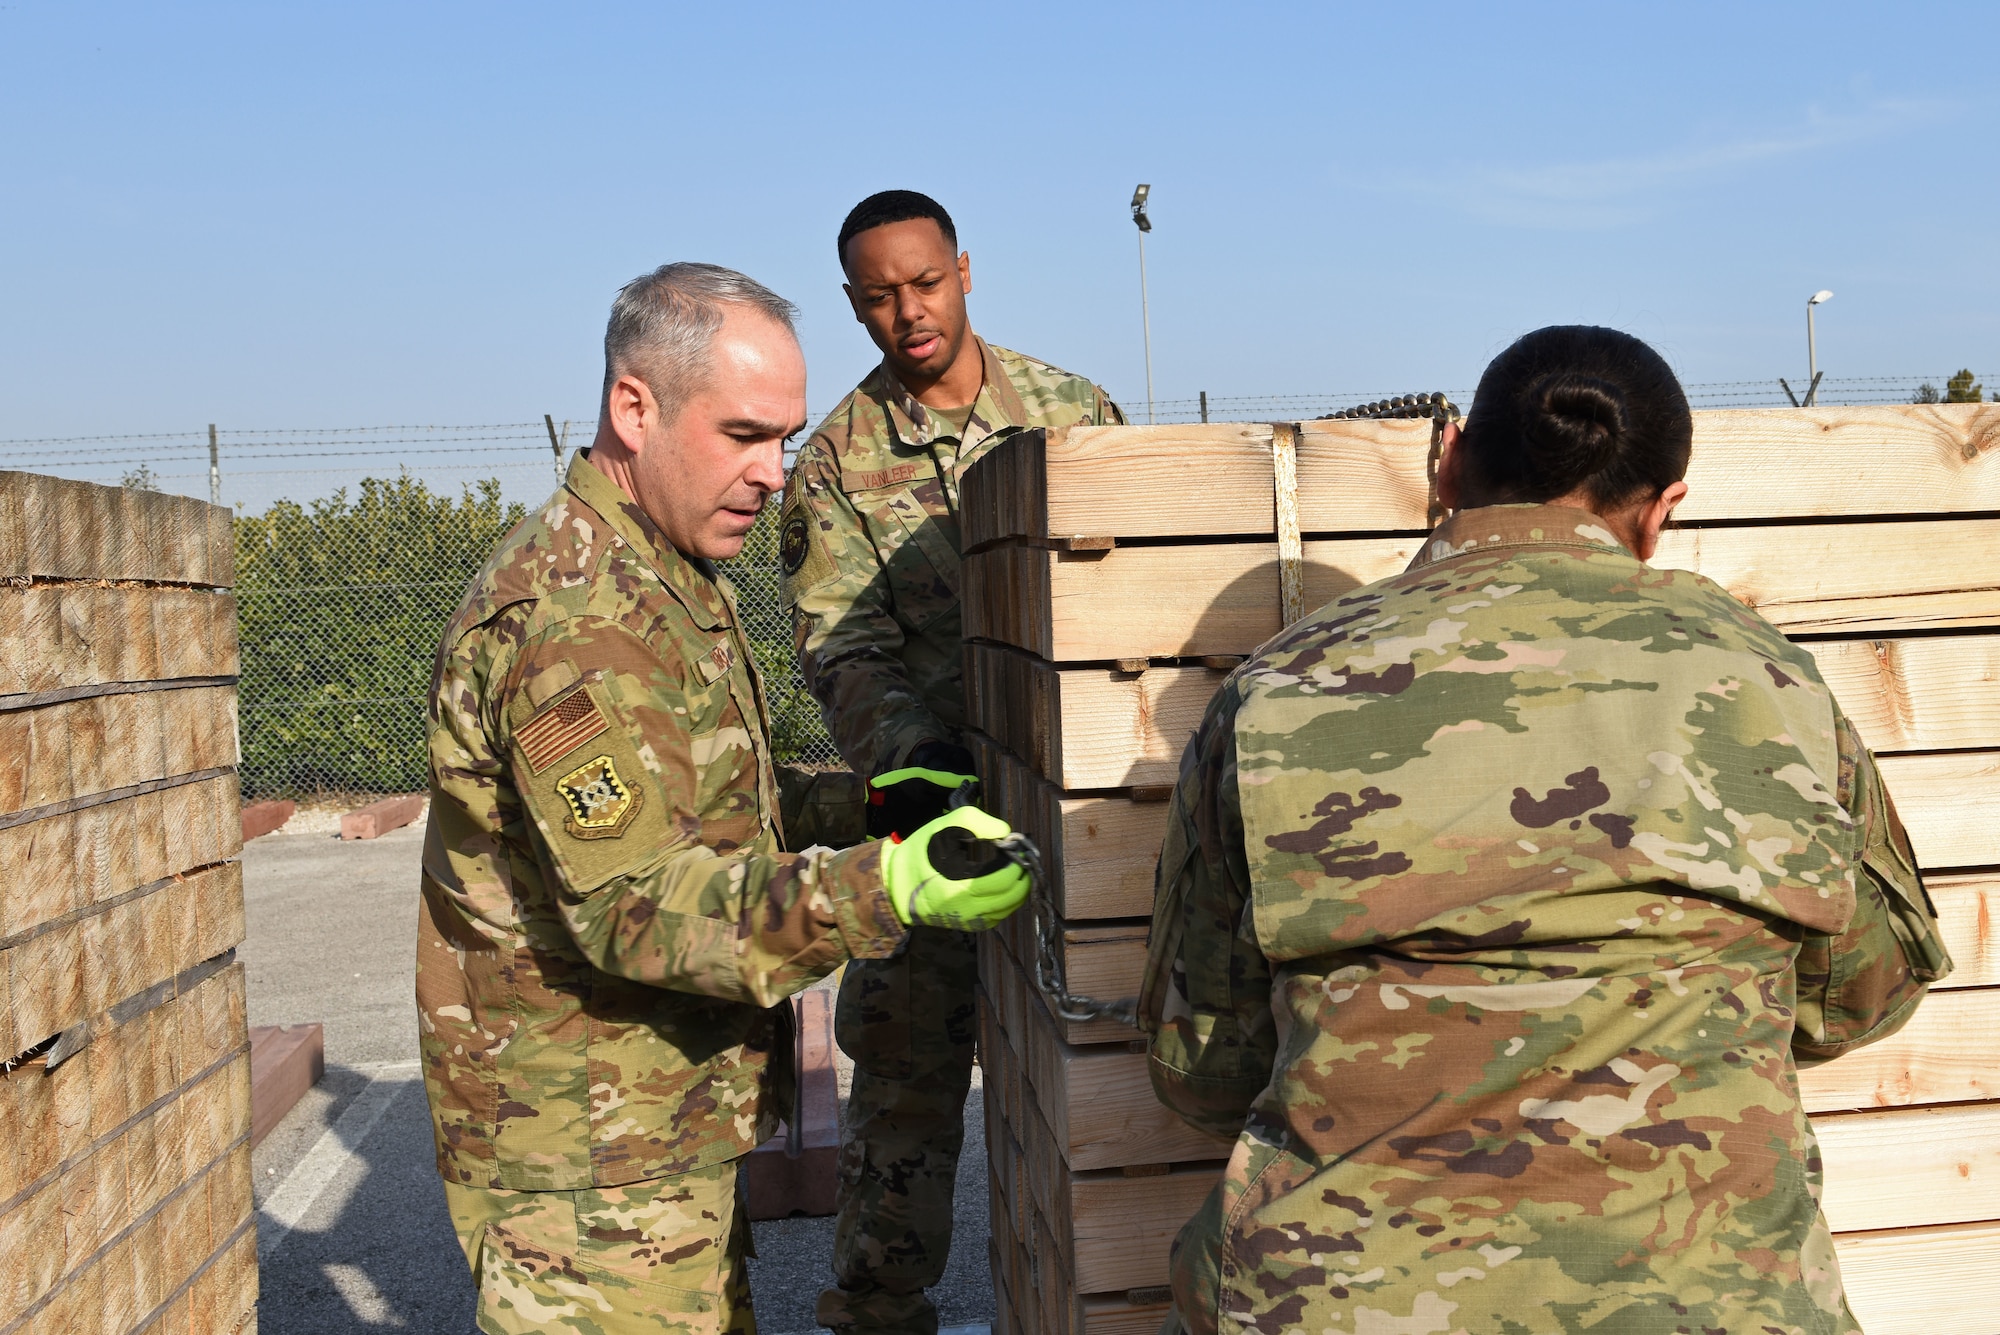 U.S. Air Force Chief Master Sgt. Kristopher Berg, U.S. Air Force Expeditionary Center command chief, assists his team during a pallet building competition with Airmen from the 724th Air Mobility Squadron and the 31st Logistics Readiness Squadron at Aviano Air Base, Italy, Jan. 24, 2020. The competition was part of a site visit conducted by the USAF Expeditionary Center as part of a larger visit to the geographically separated units under the 521st Air Mobility Operations Wing’s area of responsibility.